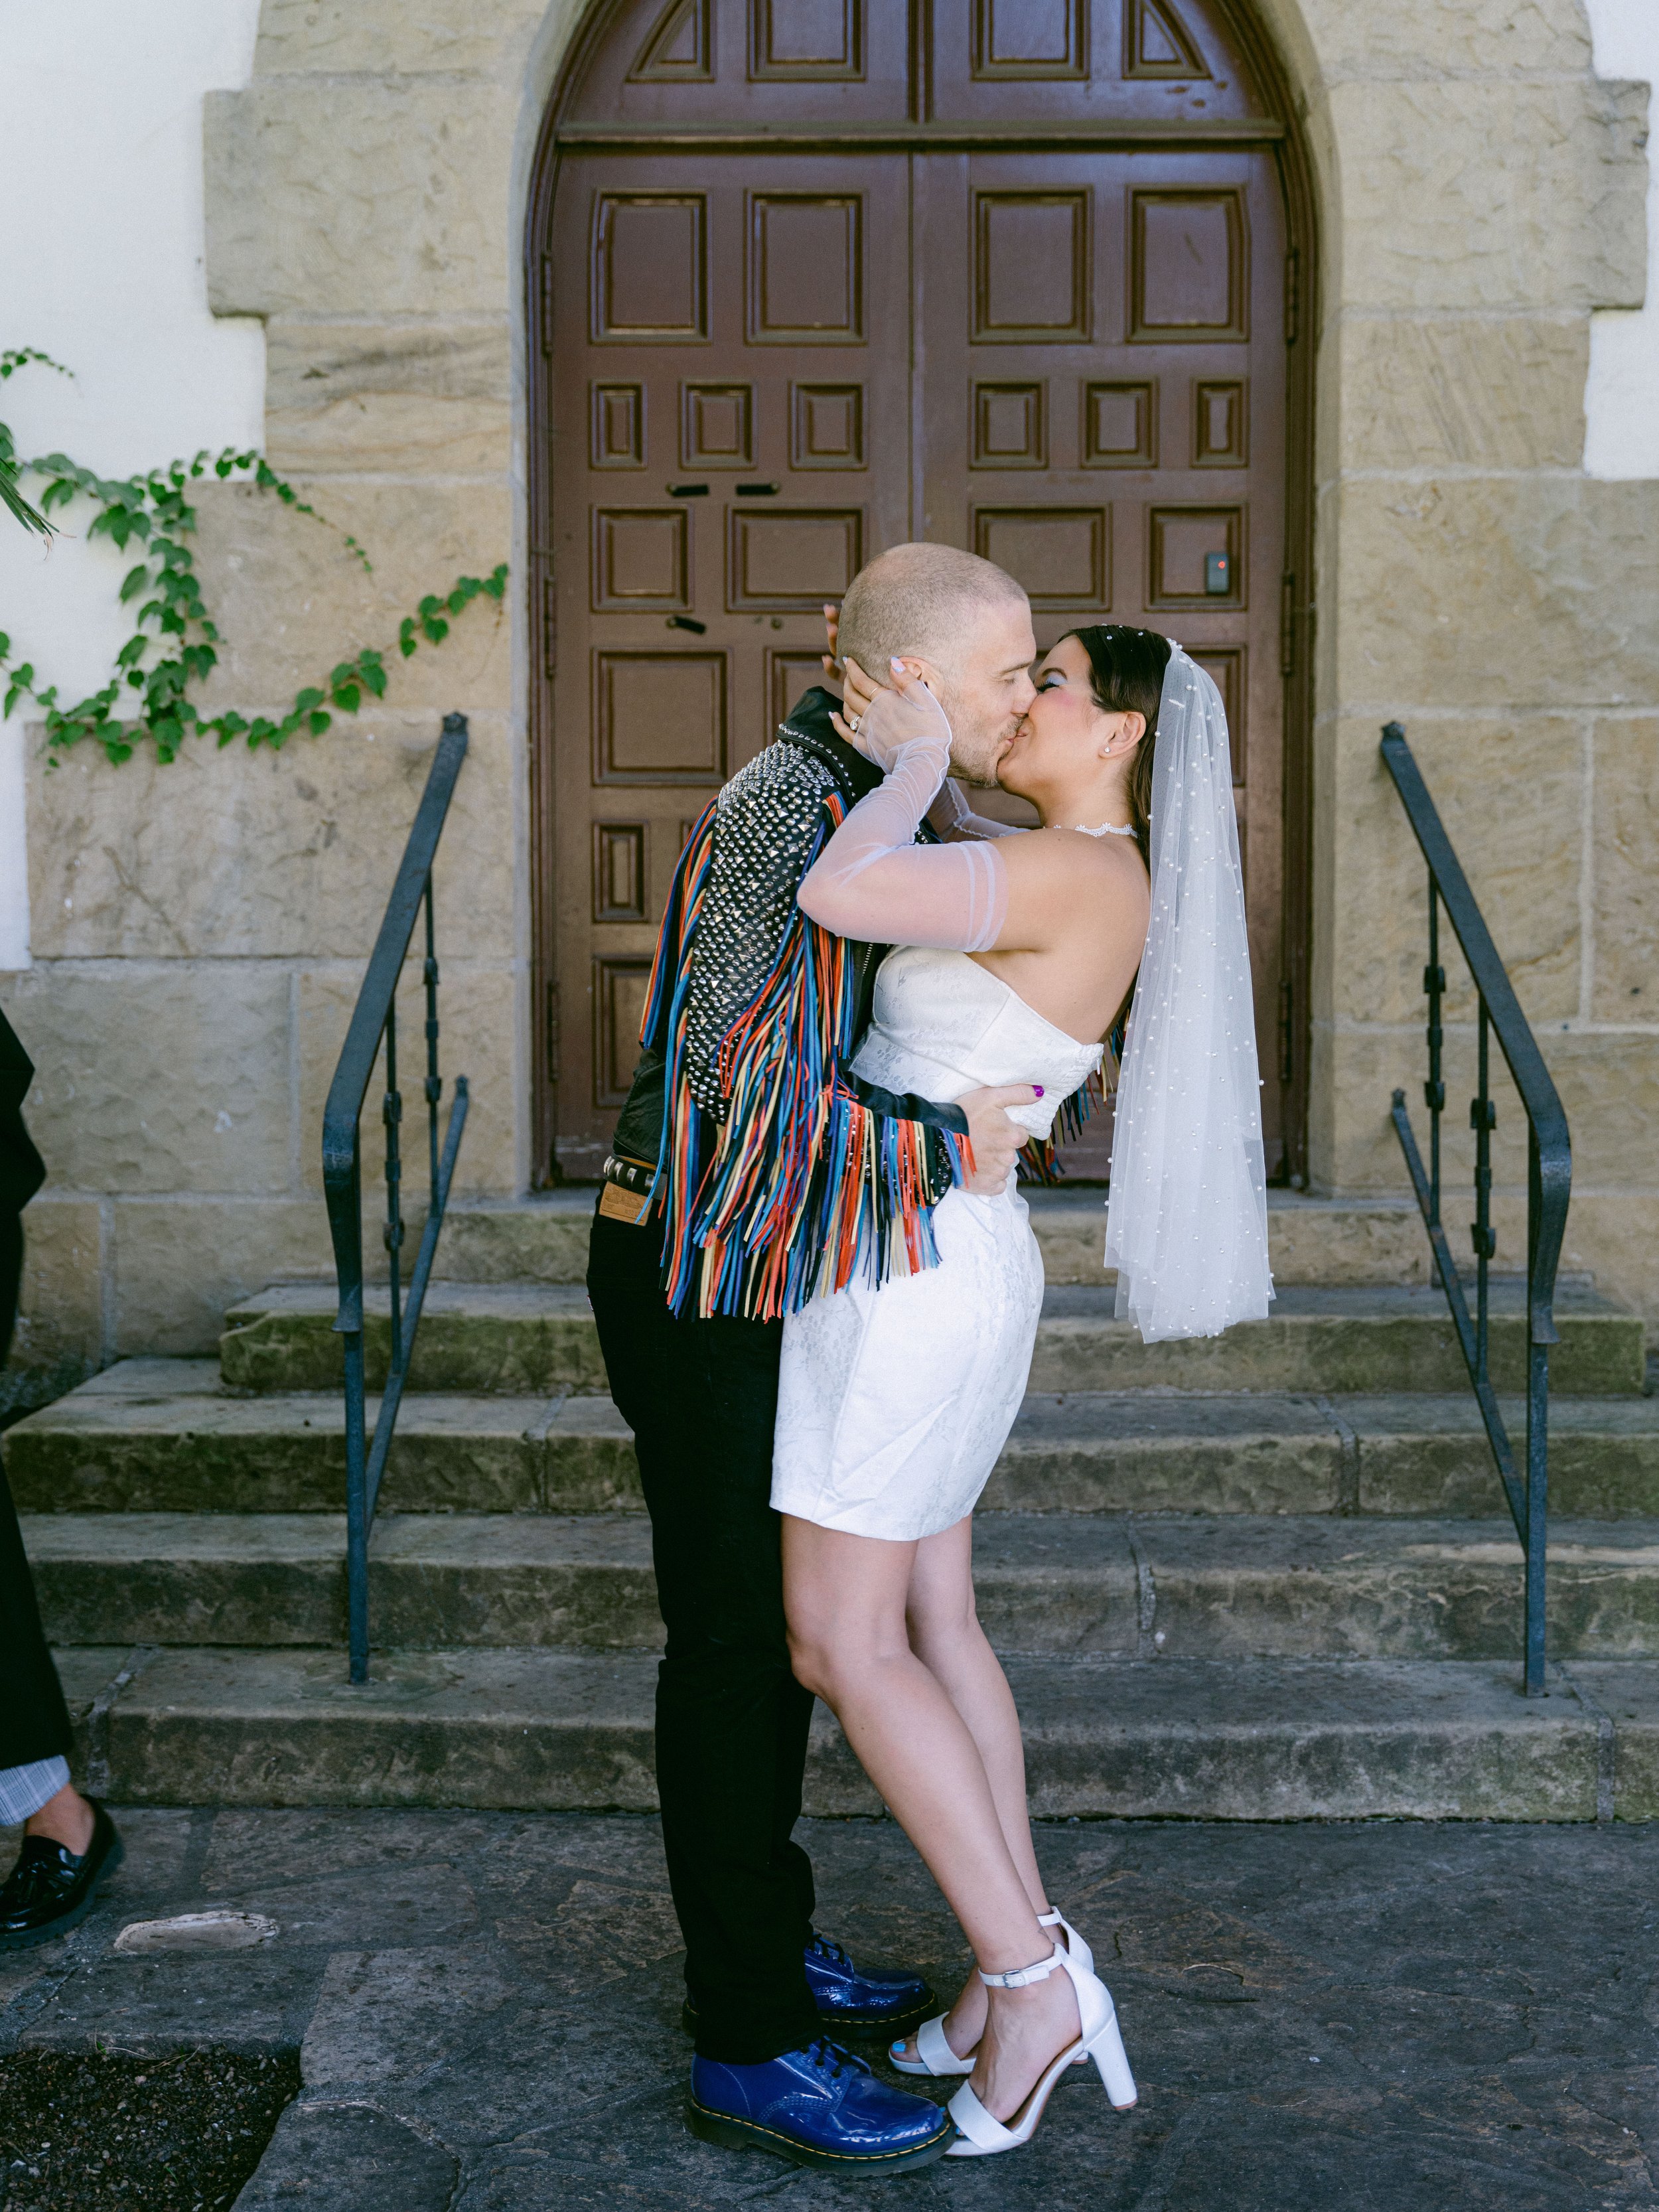 www.santabarbarawedding.com | Santa Barbara Courthouse | The Bomani’s | Bride and Groom’s First Kiss as Married Couple